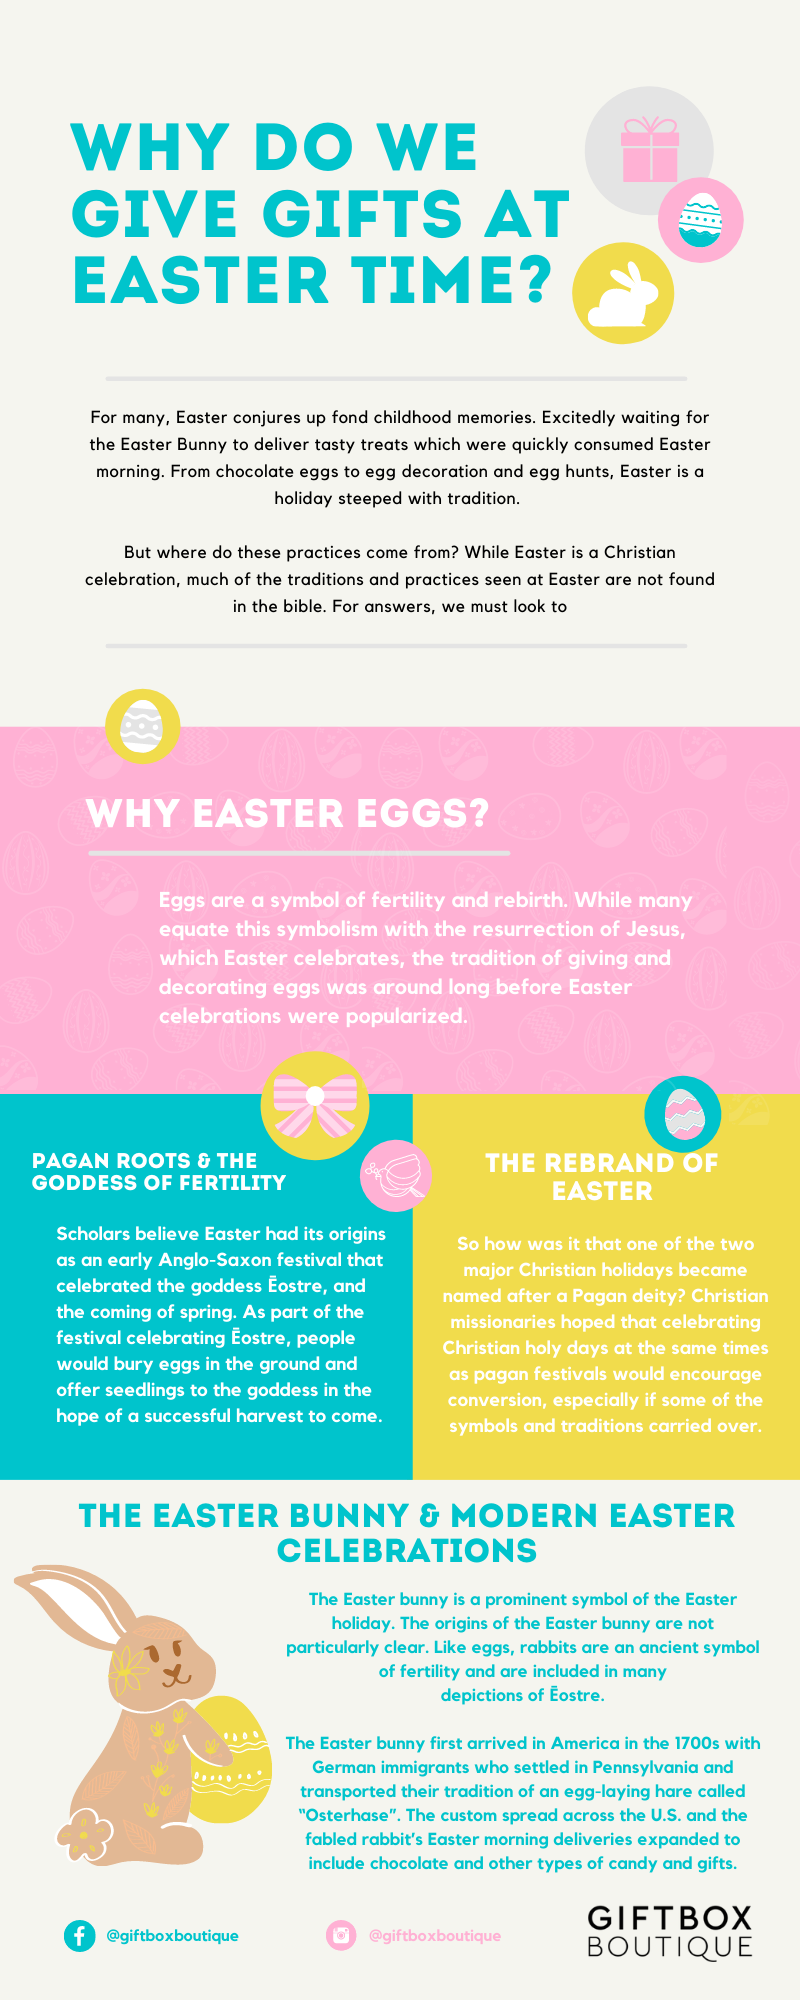 Why Do We Give Gifts at Easter Time?